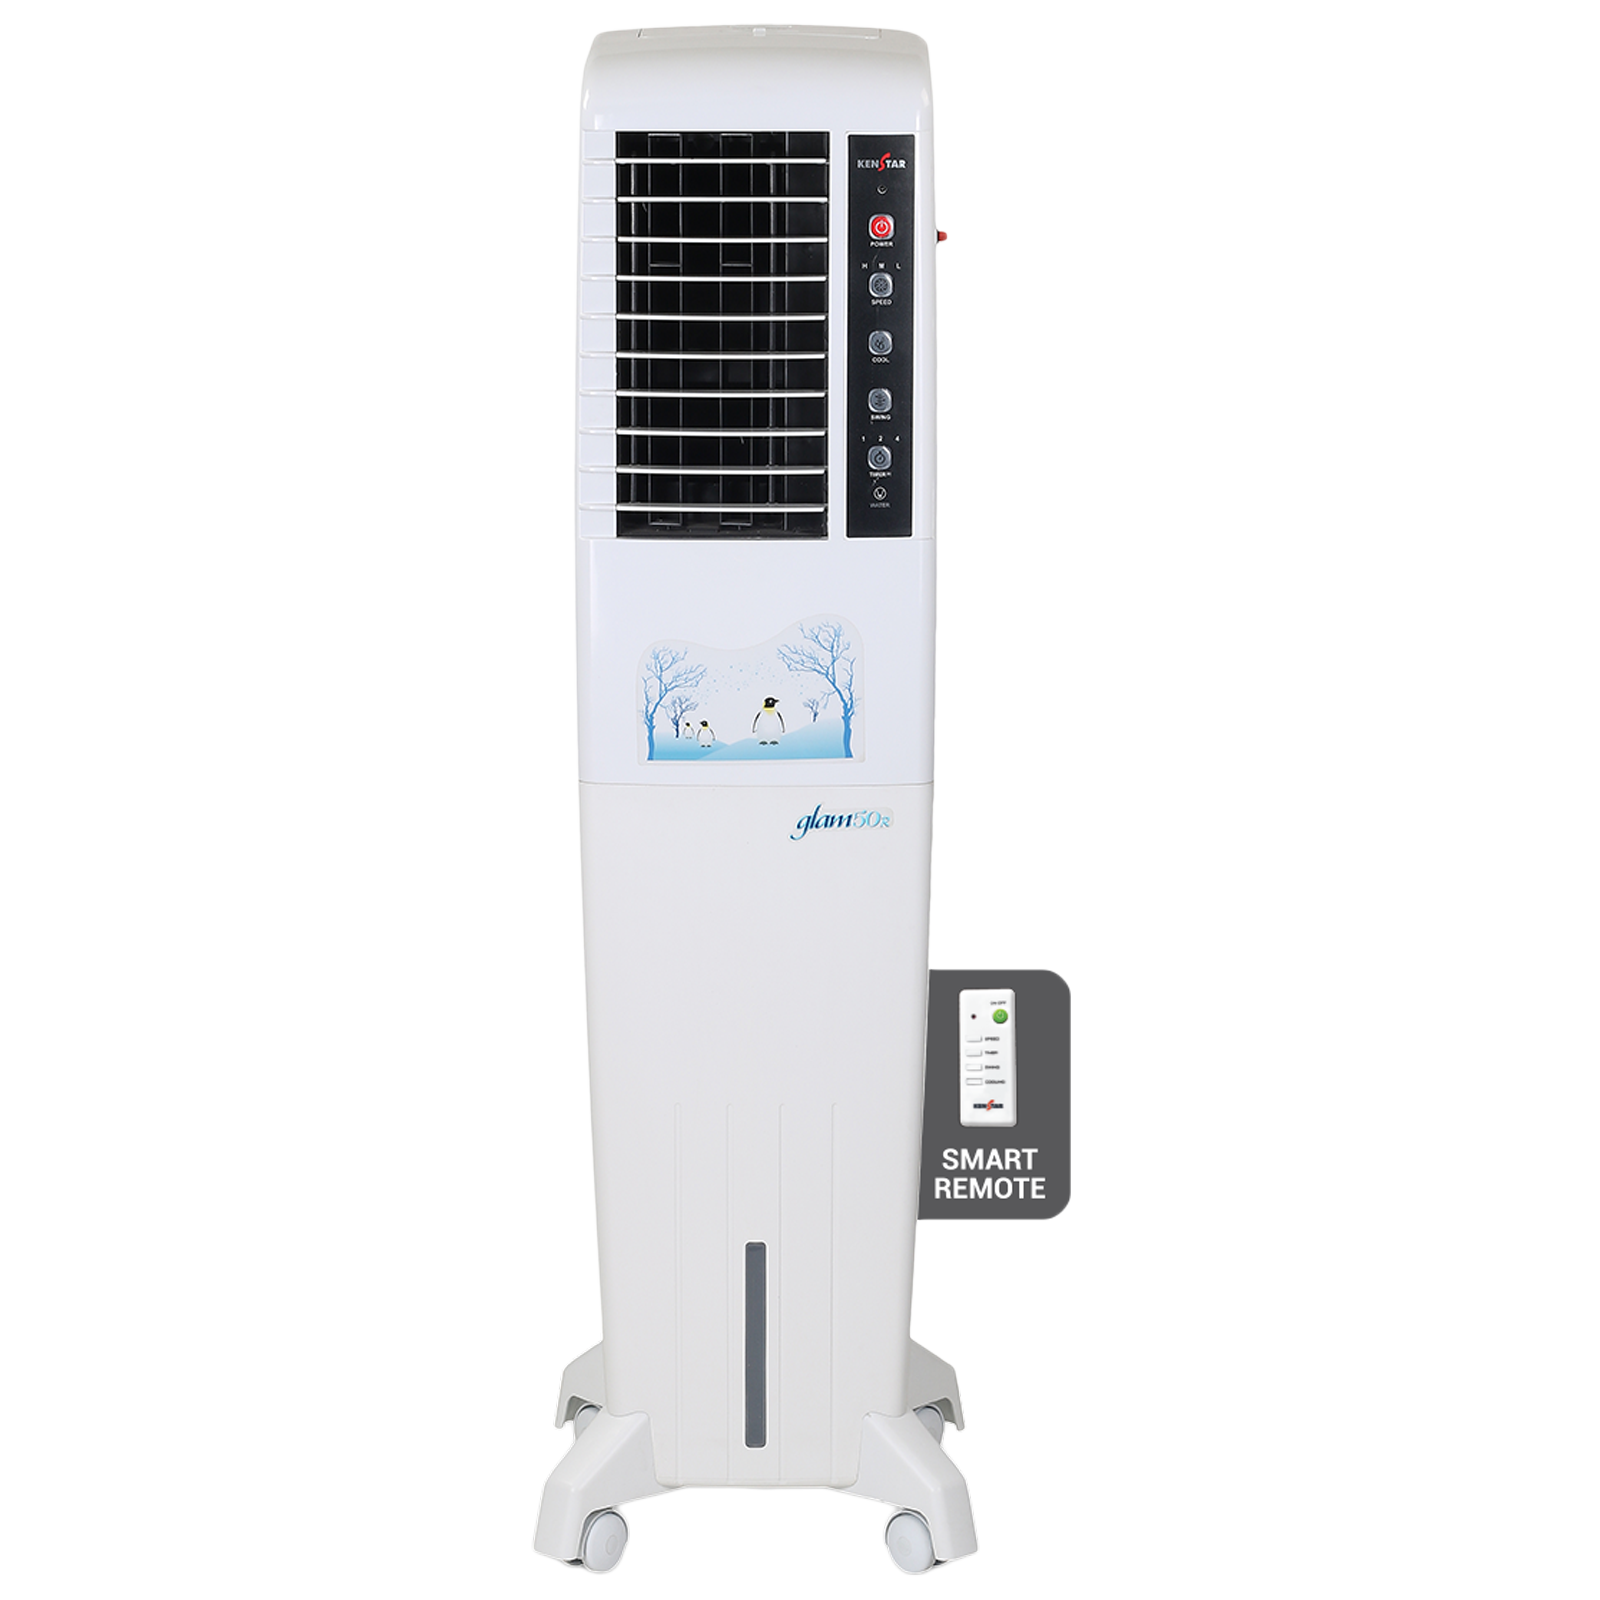 Kenstar Glam RE 50 Litres Tower Air Cooler (Smart Remote, KCLGLMWH050BRH-ELM, White)